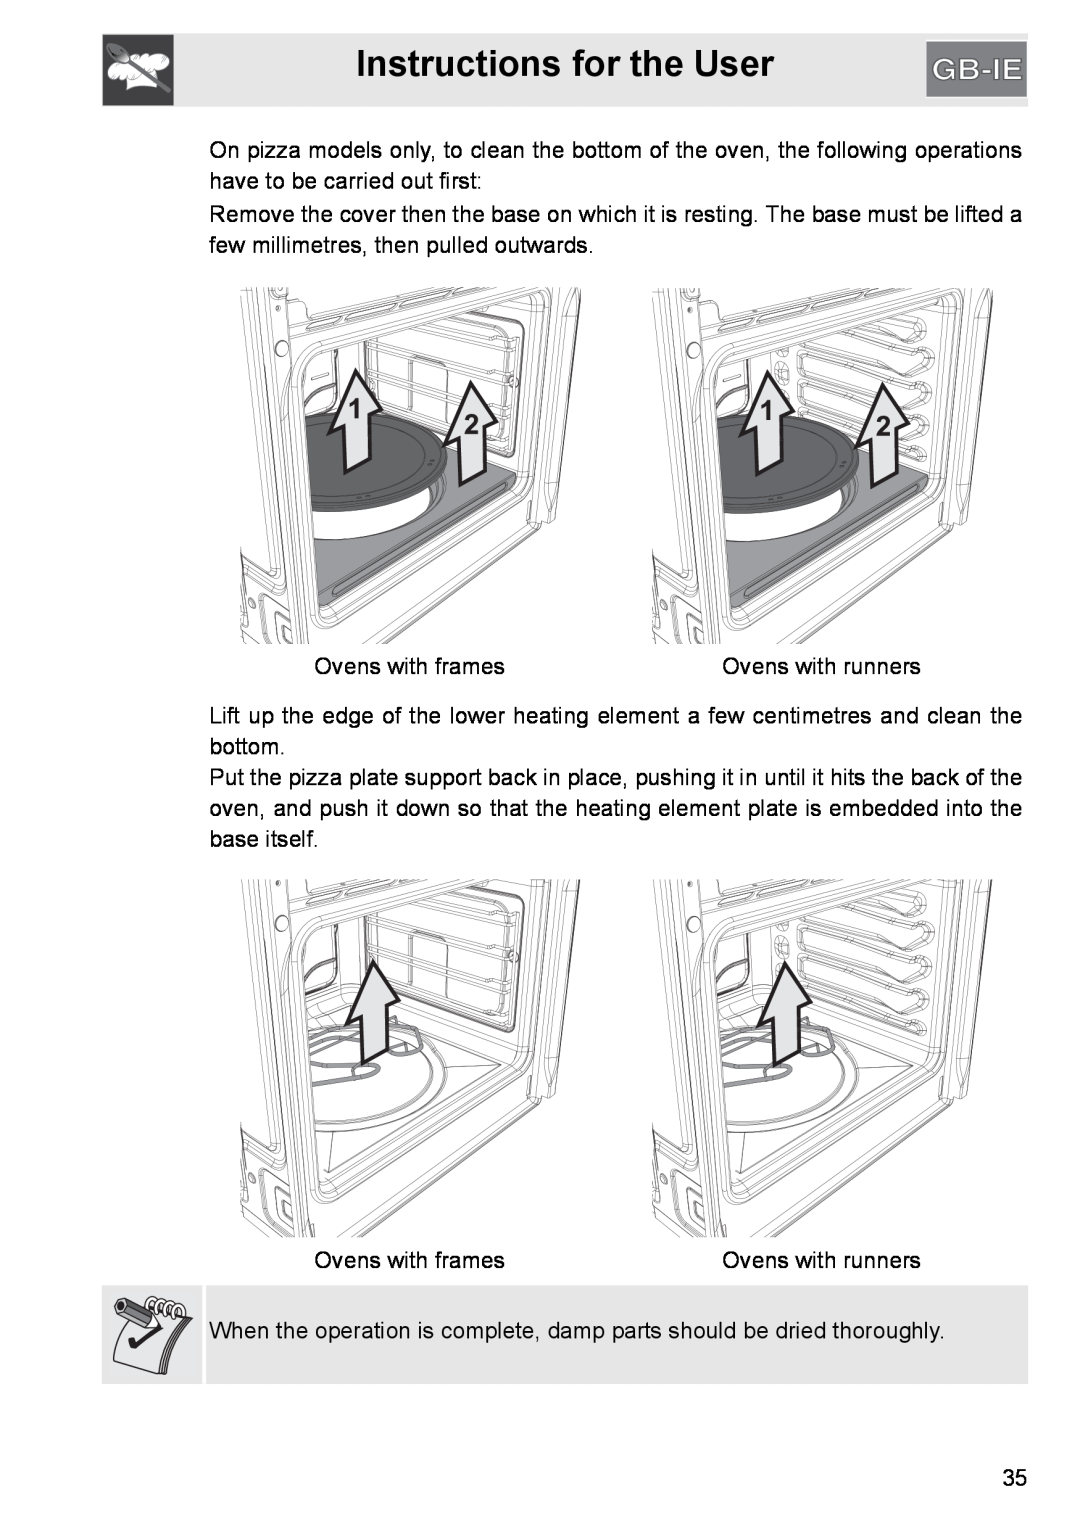 GE SA304X-8 manual Instructions for the User, Ovens with frames 